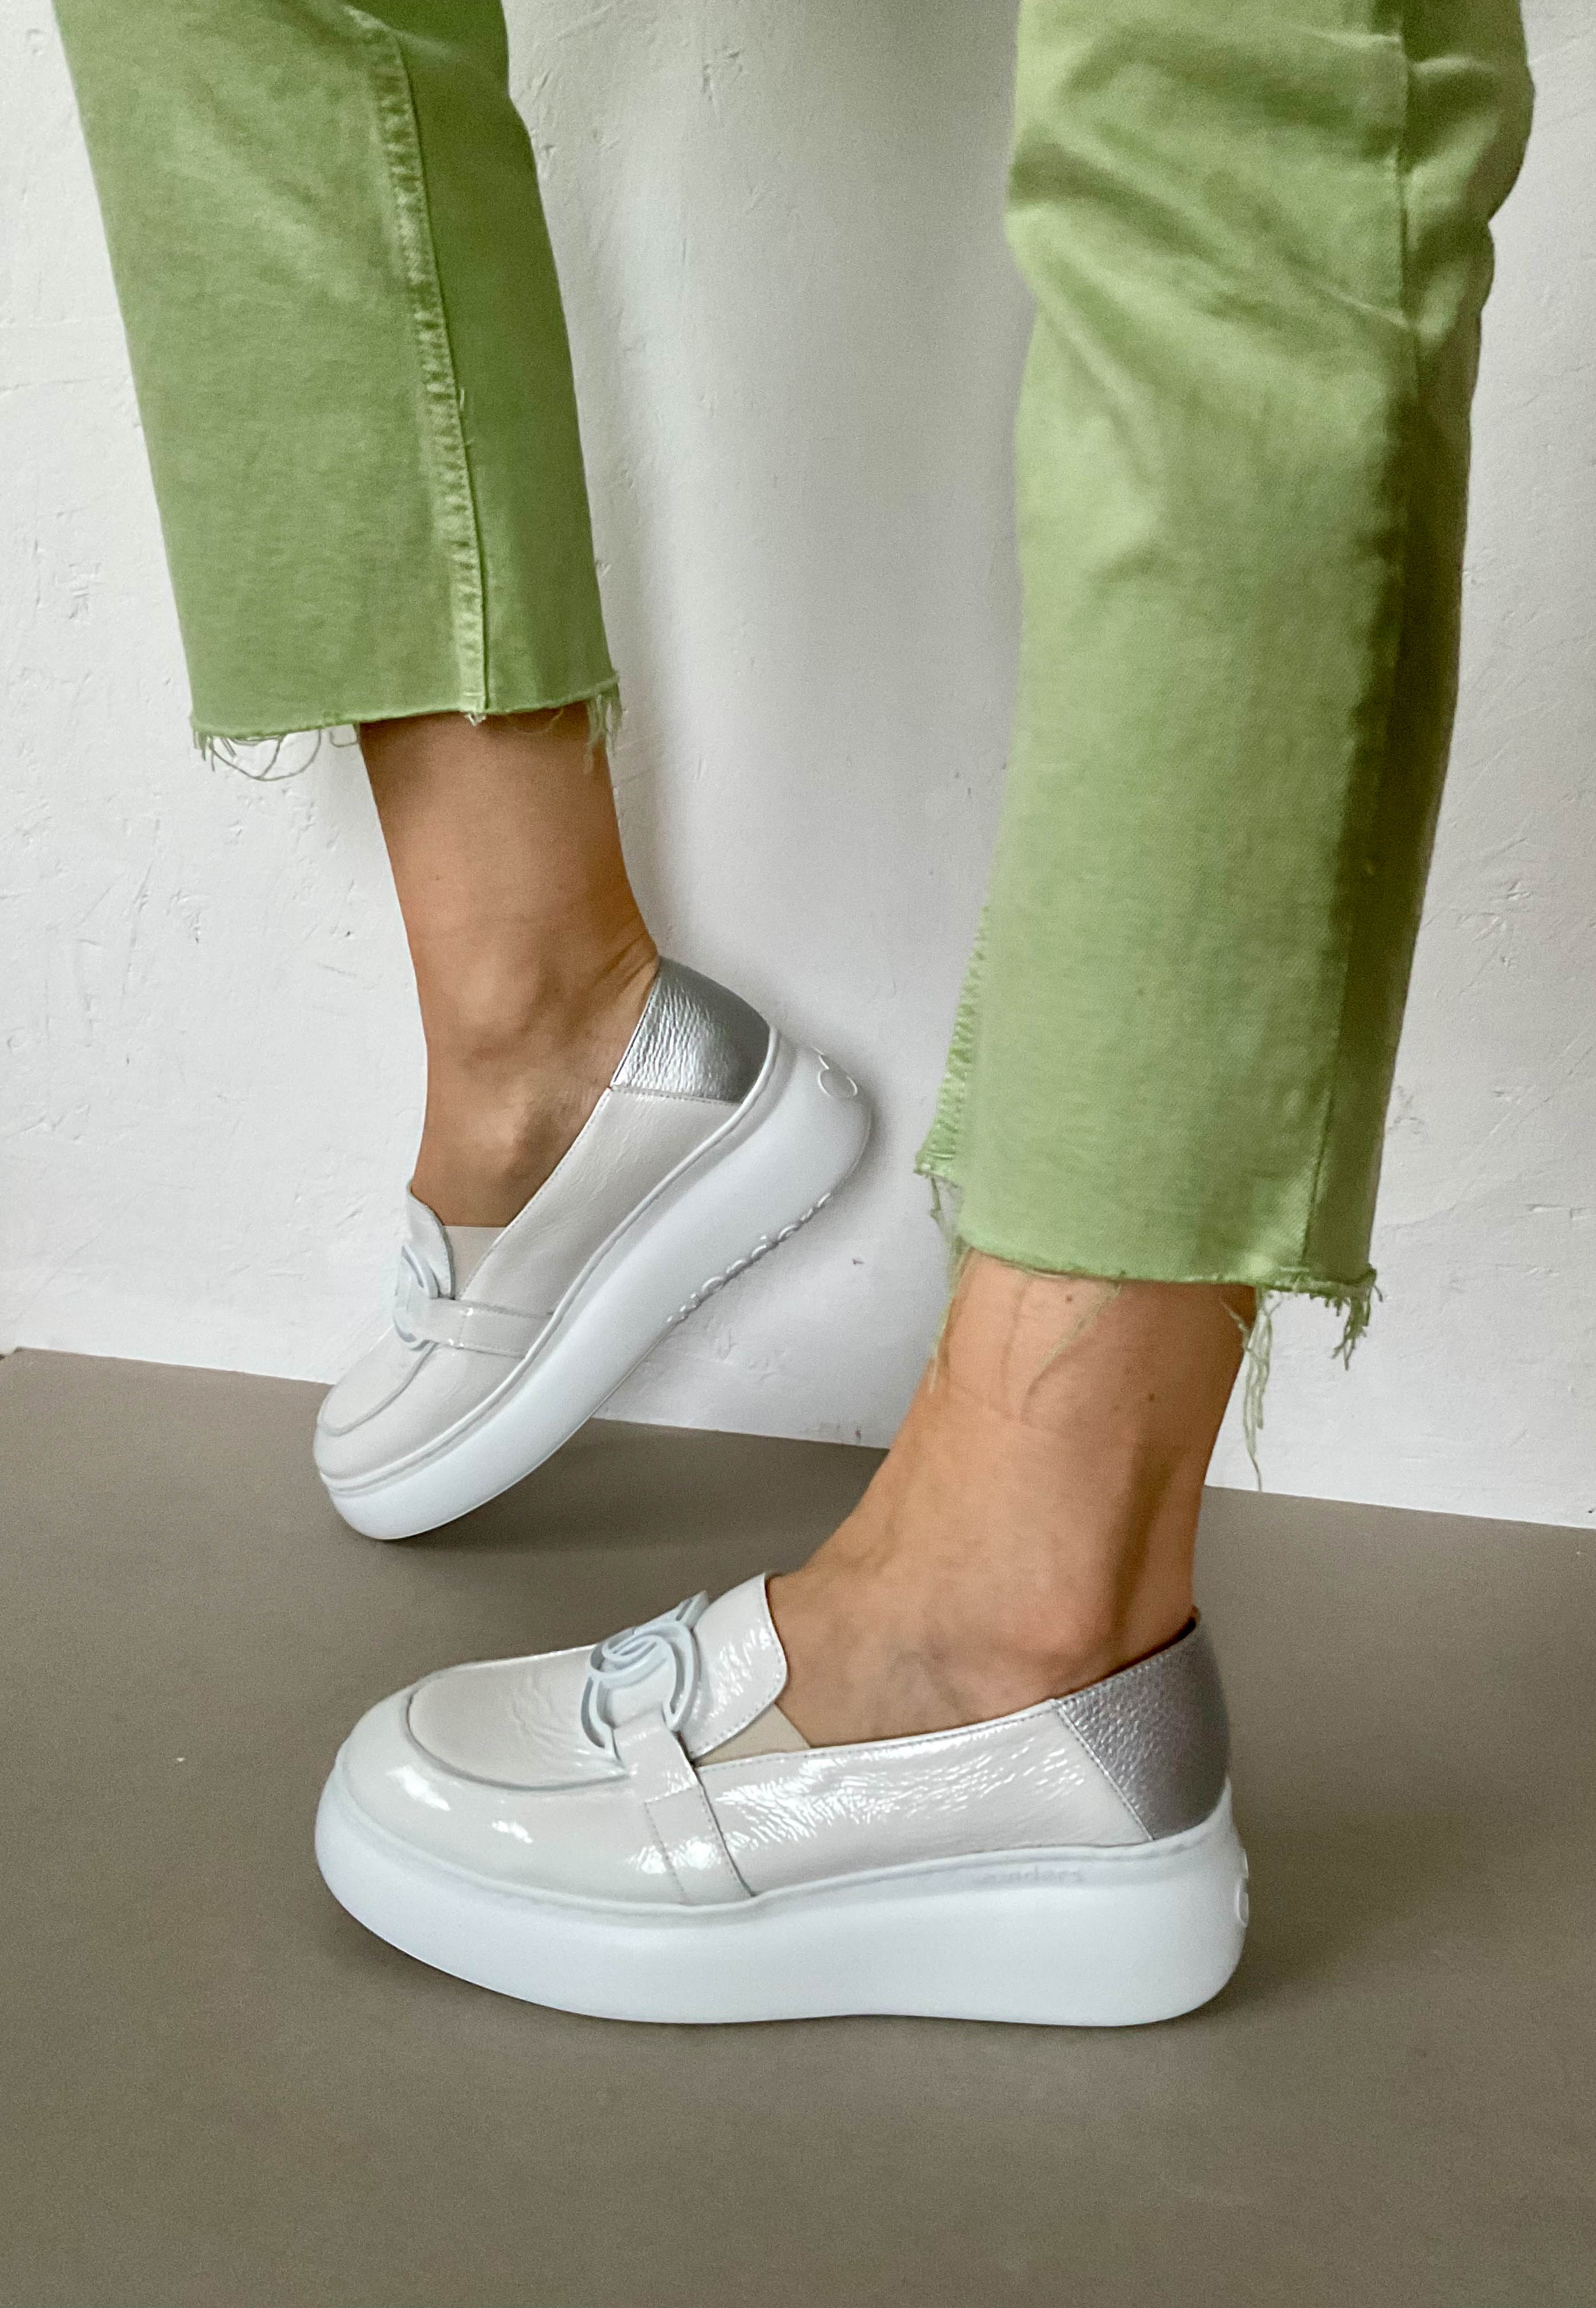 white chunky loafers